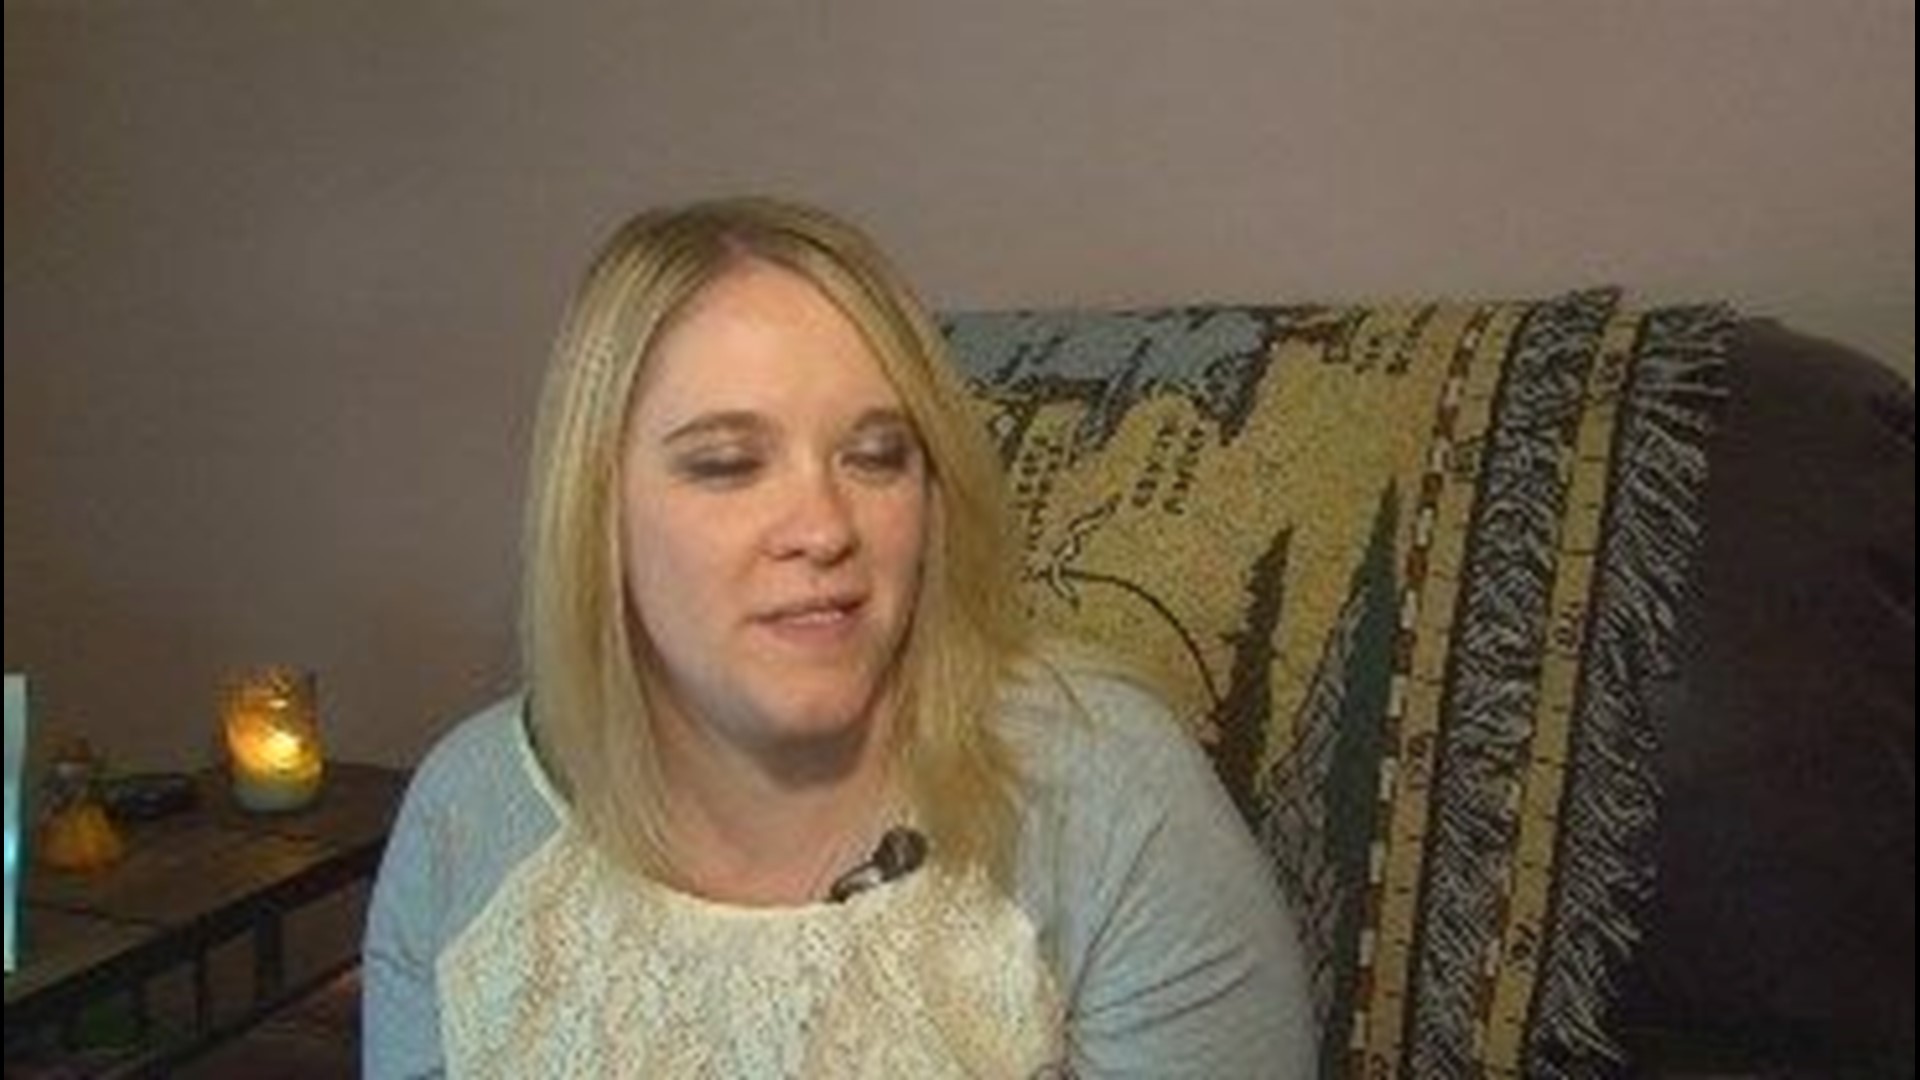 Sister of heroin victim speaks how addiction affected her